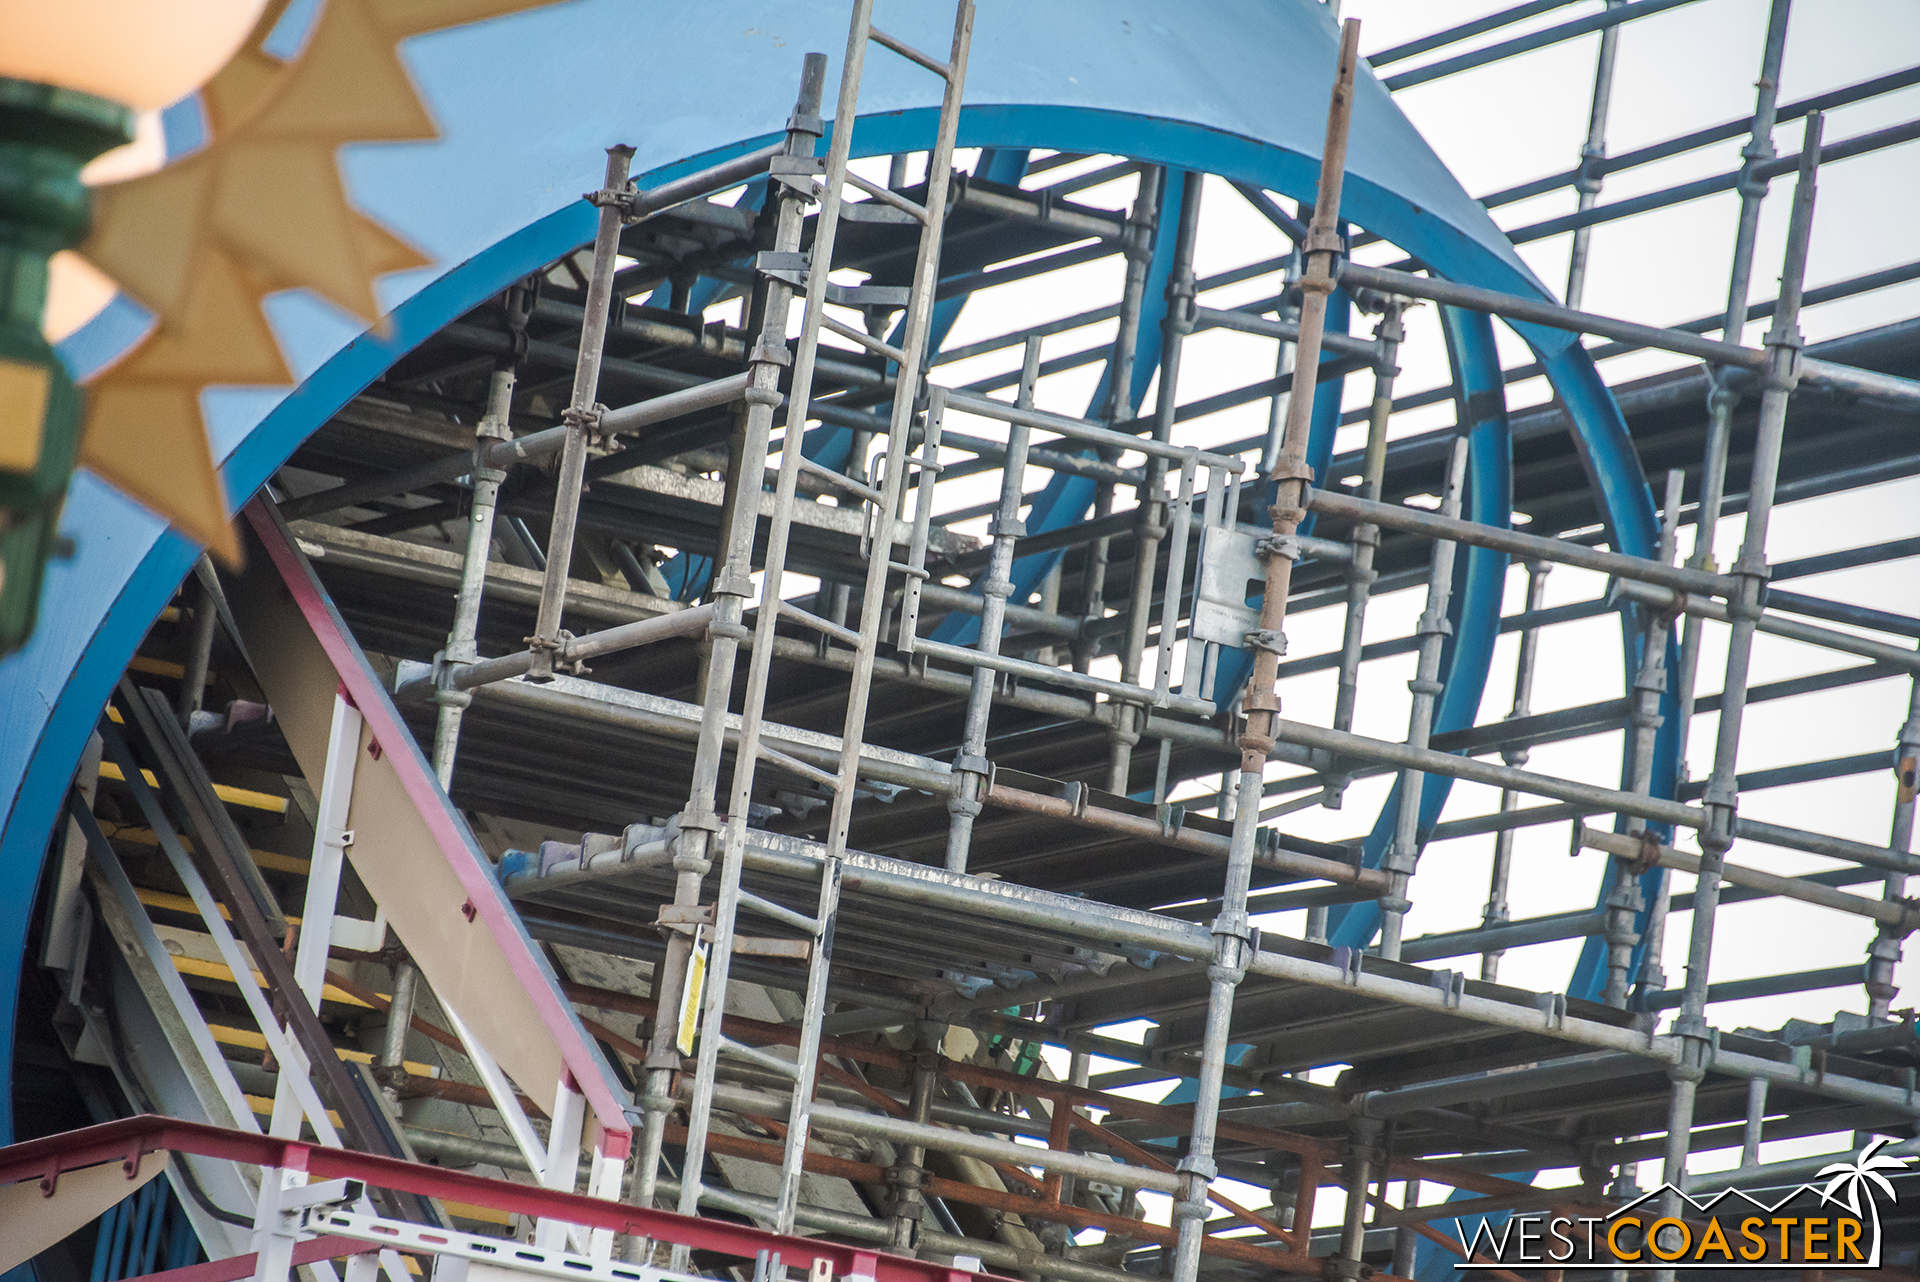  If you're going to repaint the ride, you're going to have to provide work areas throughout the entire ride! 